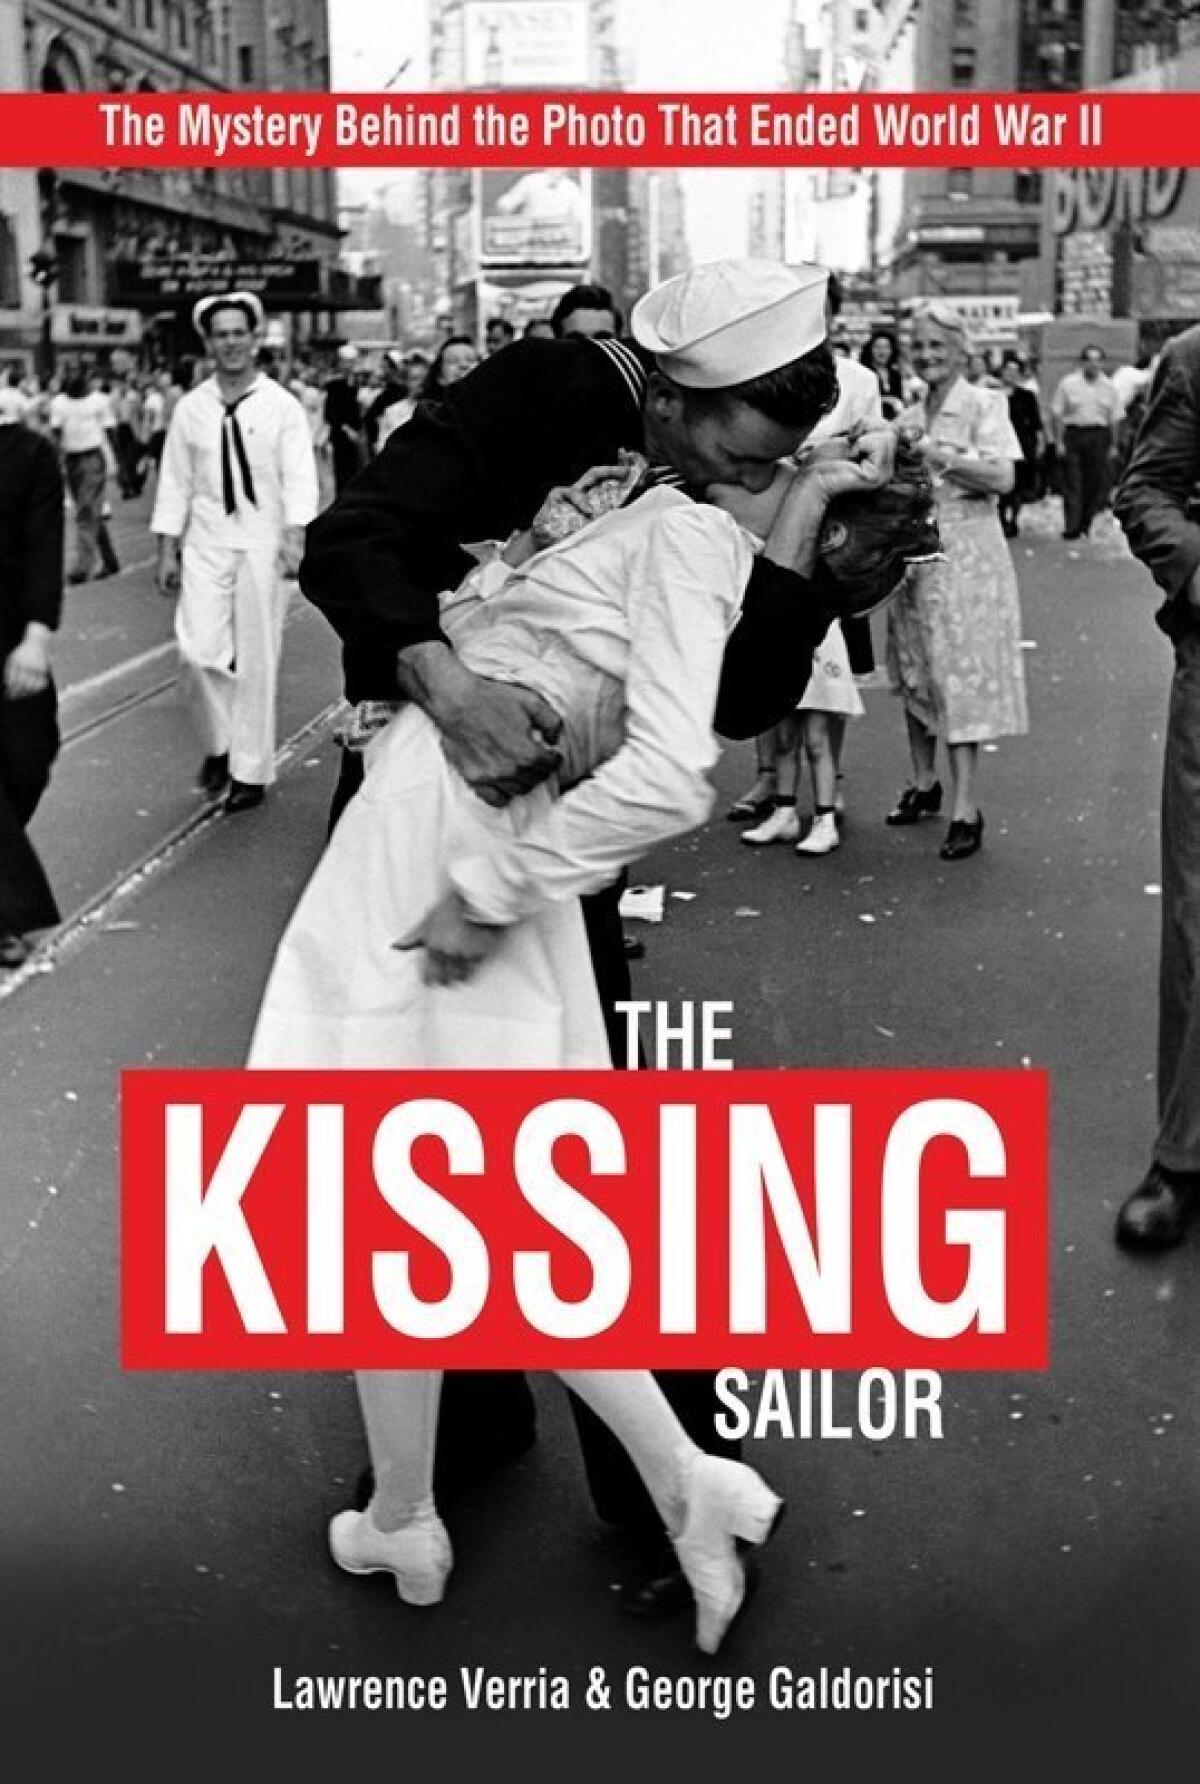 Cover of "kiss and tell" investigative book tracking down the mystery couple behind Alfred Eisenstaedt's iconic WW II "kissing sailor" photo.